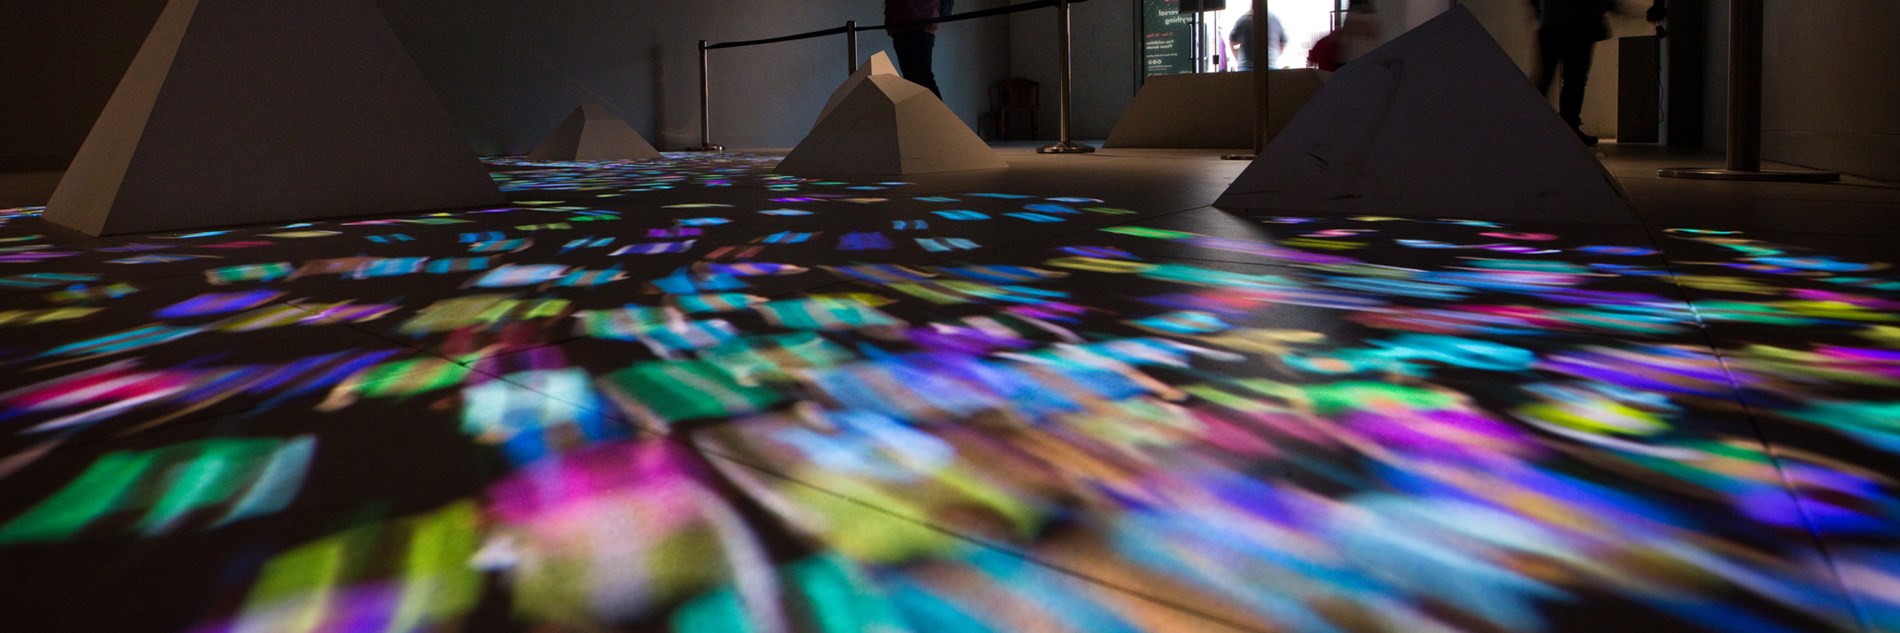 Gallery floor with truncated pyramidal shapes and a stream of multi-coloured lights. In the background there is a barrier, several adults and the gallery door. 